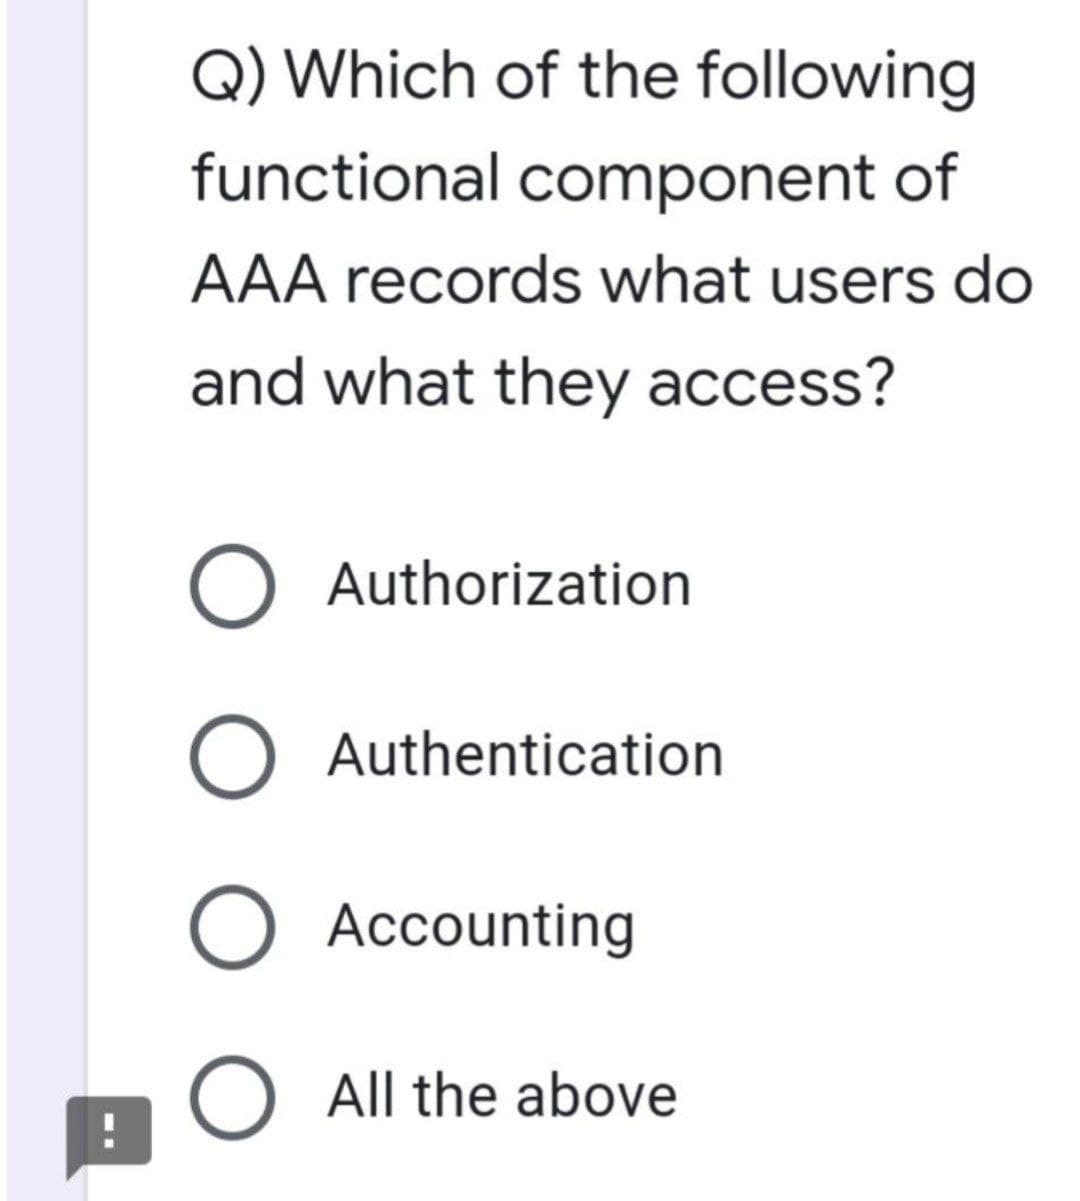 Q) Which of the following
functional component of
AAA records what users do
and what they access?
O
Authorization
O Authentication
O Accounting
O All the above